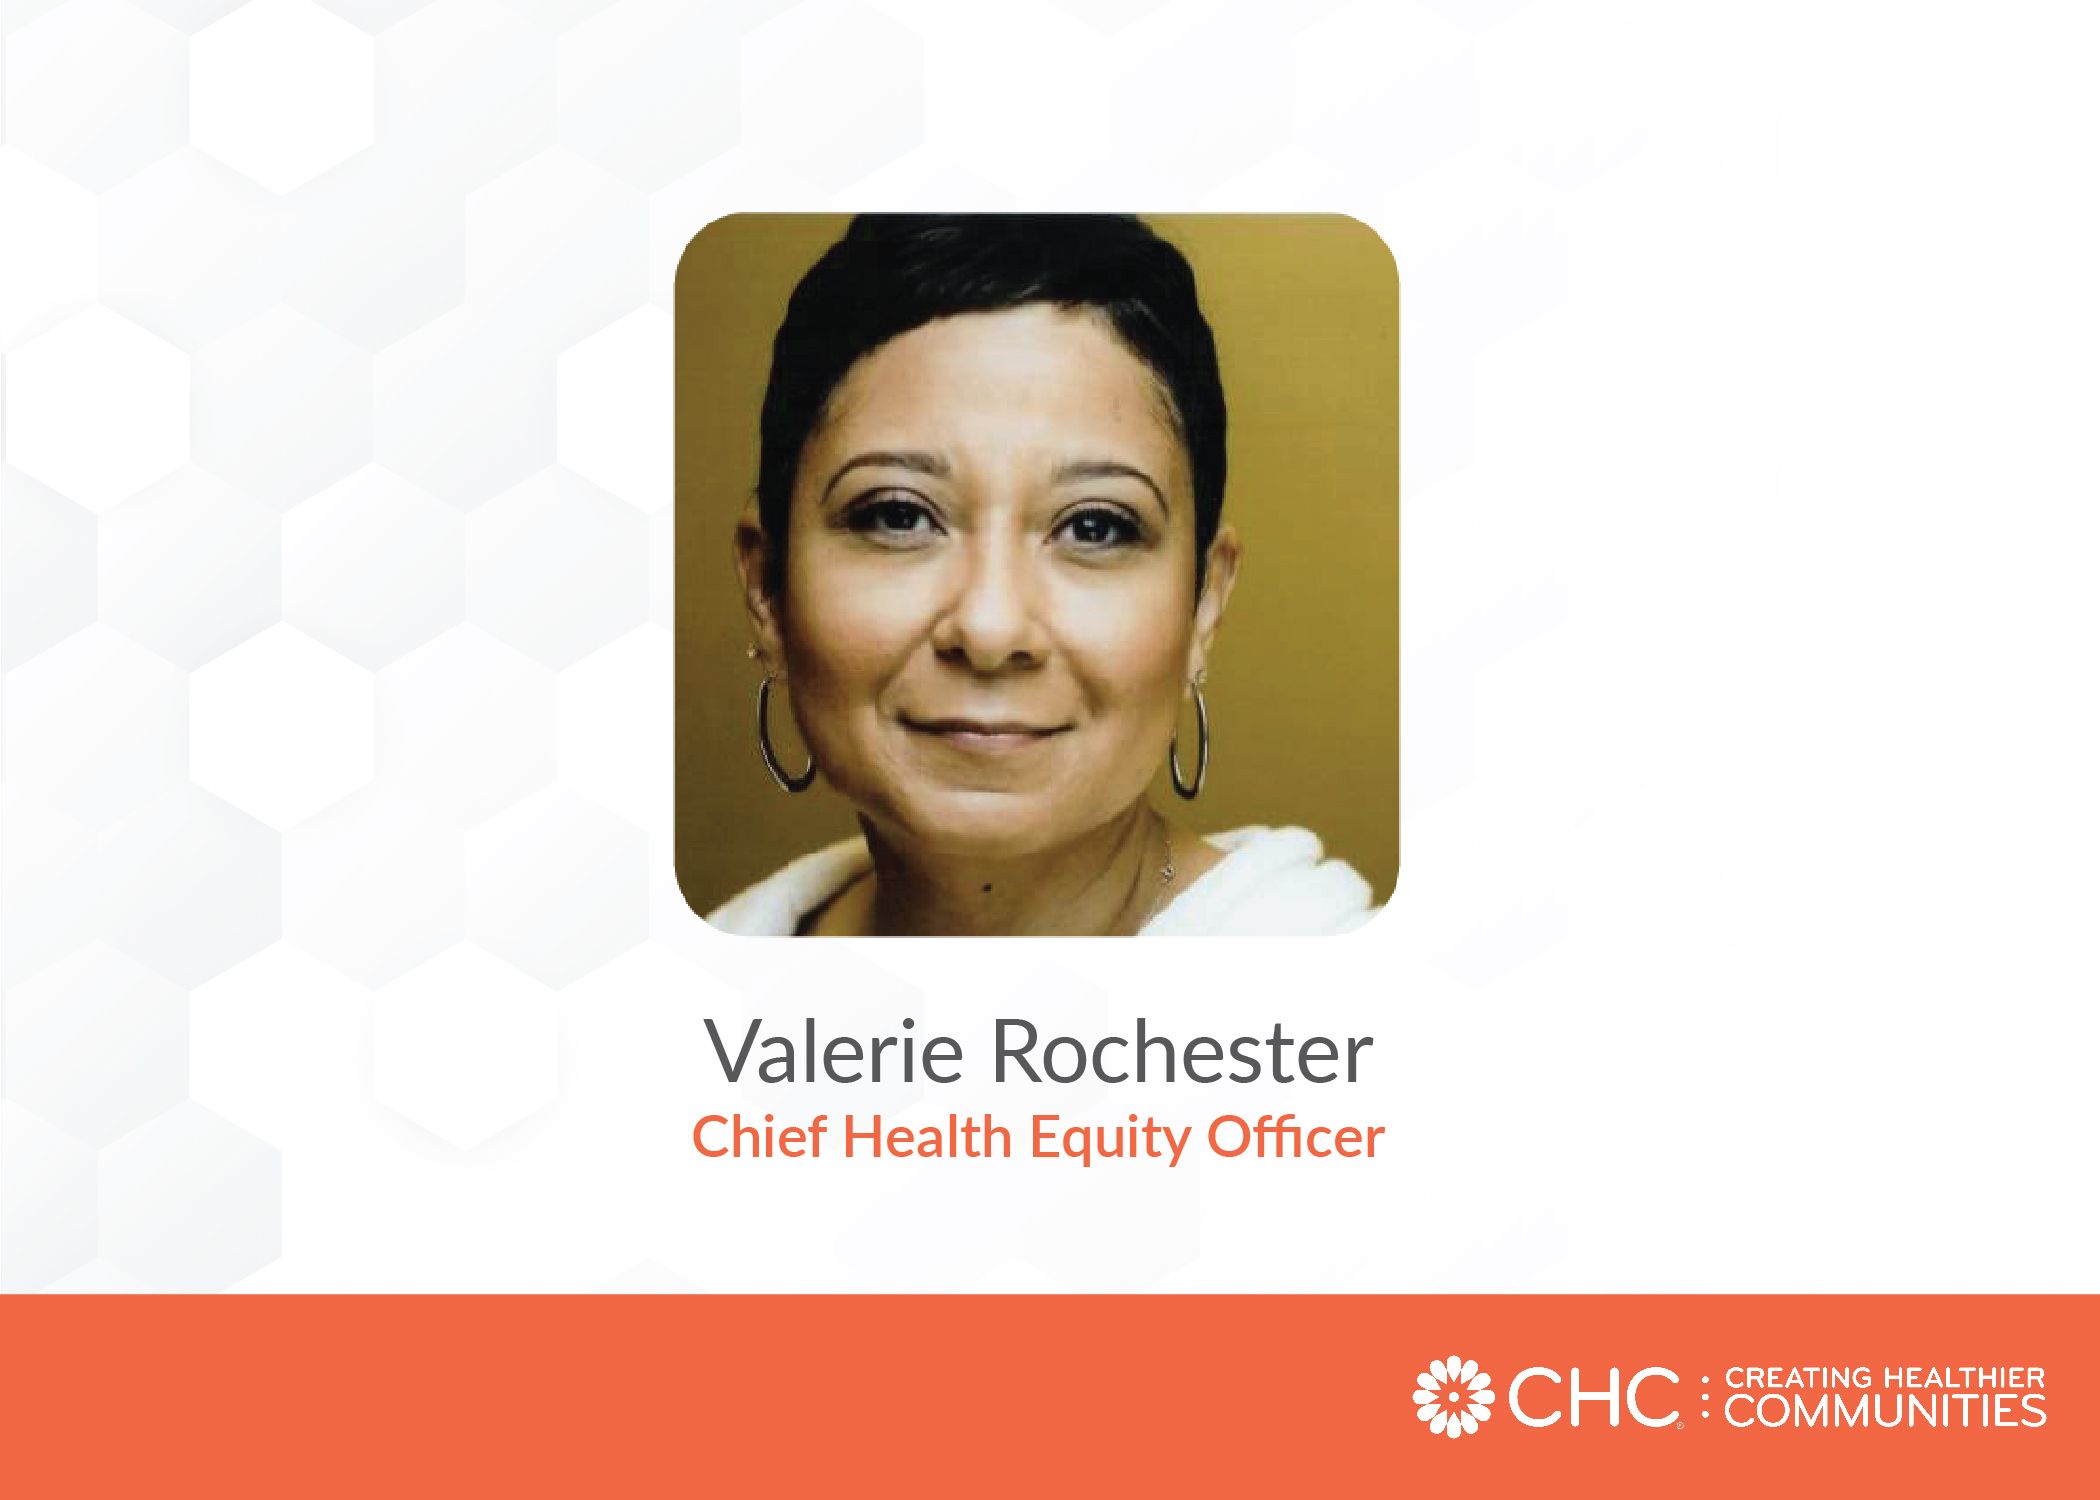 Valerie L. Rochester, CHC's New Chief Health Equity Officer